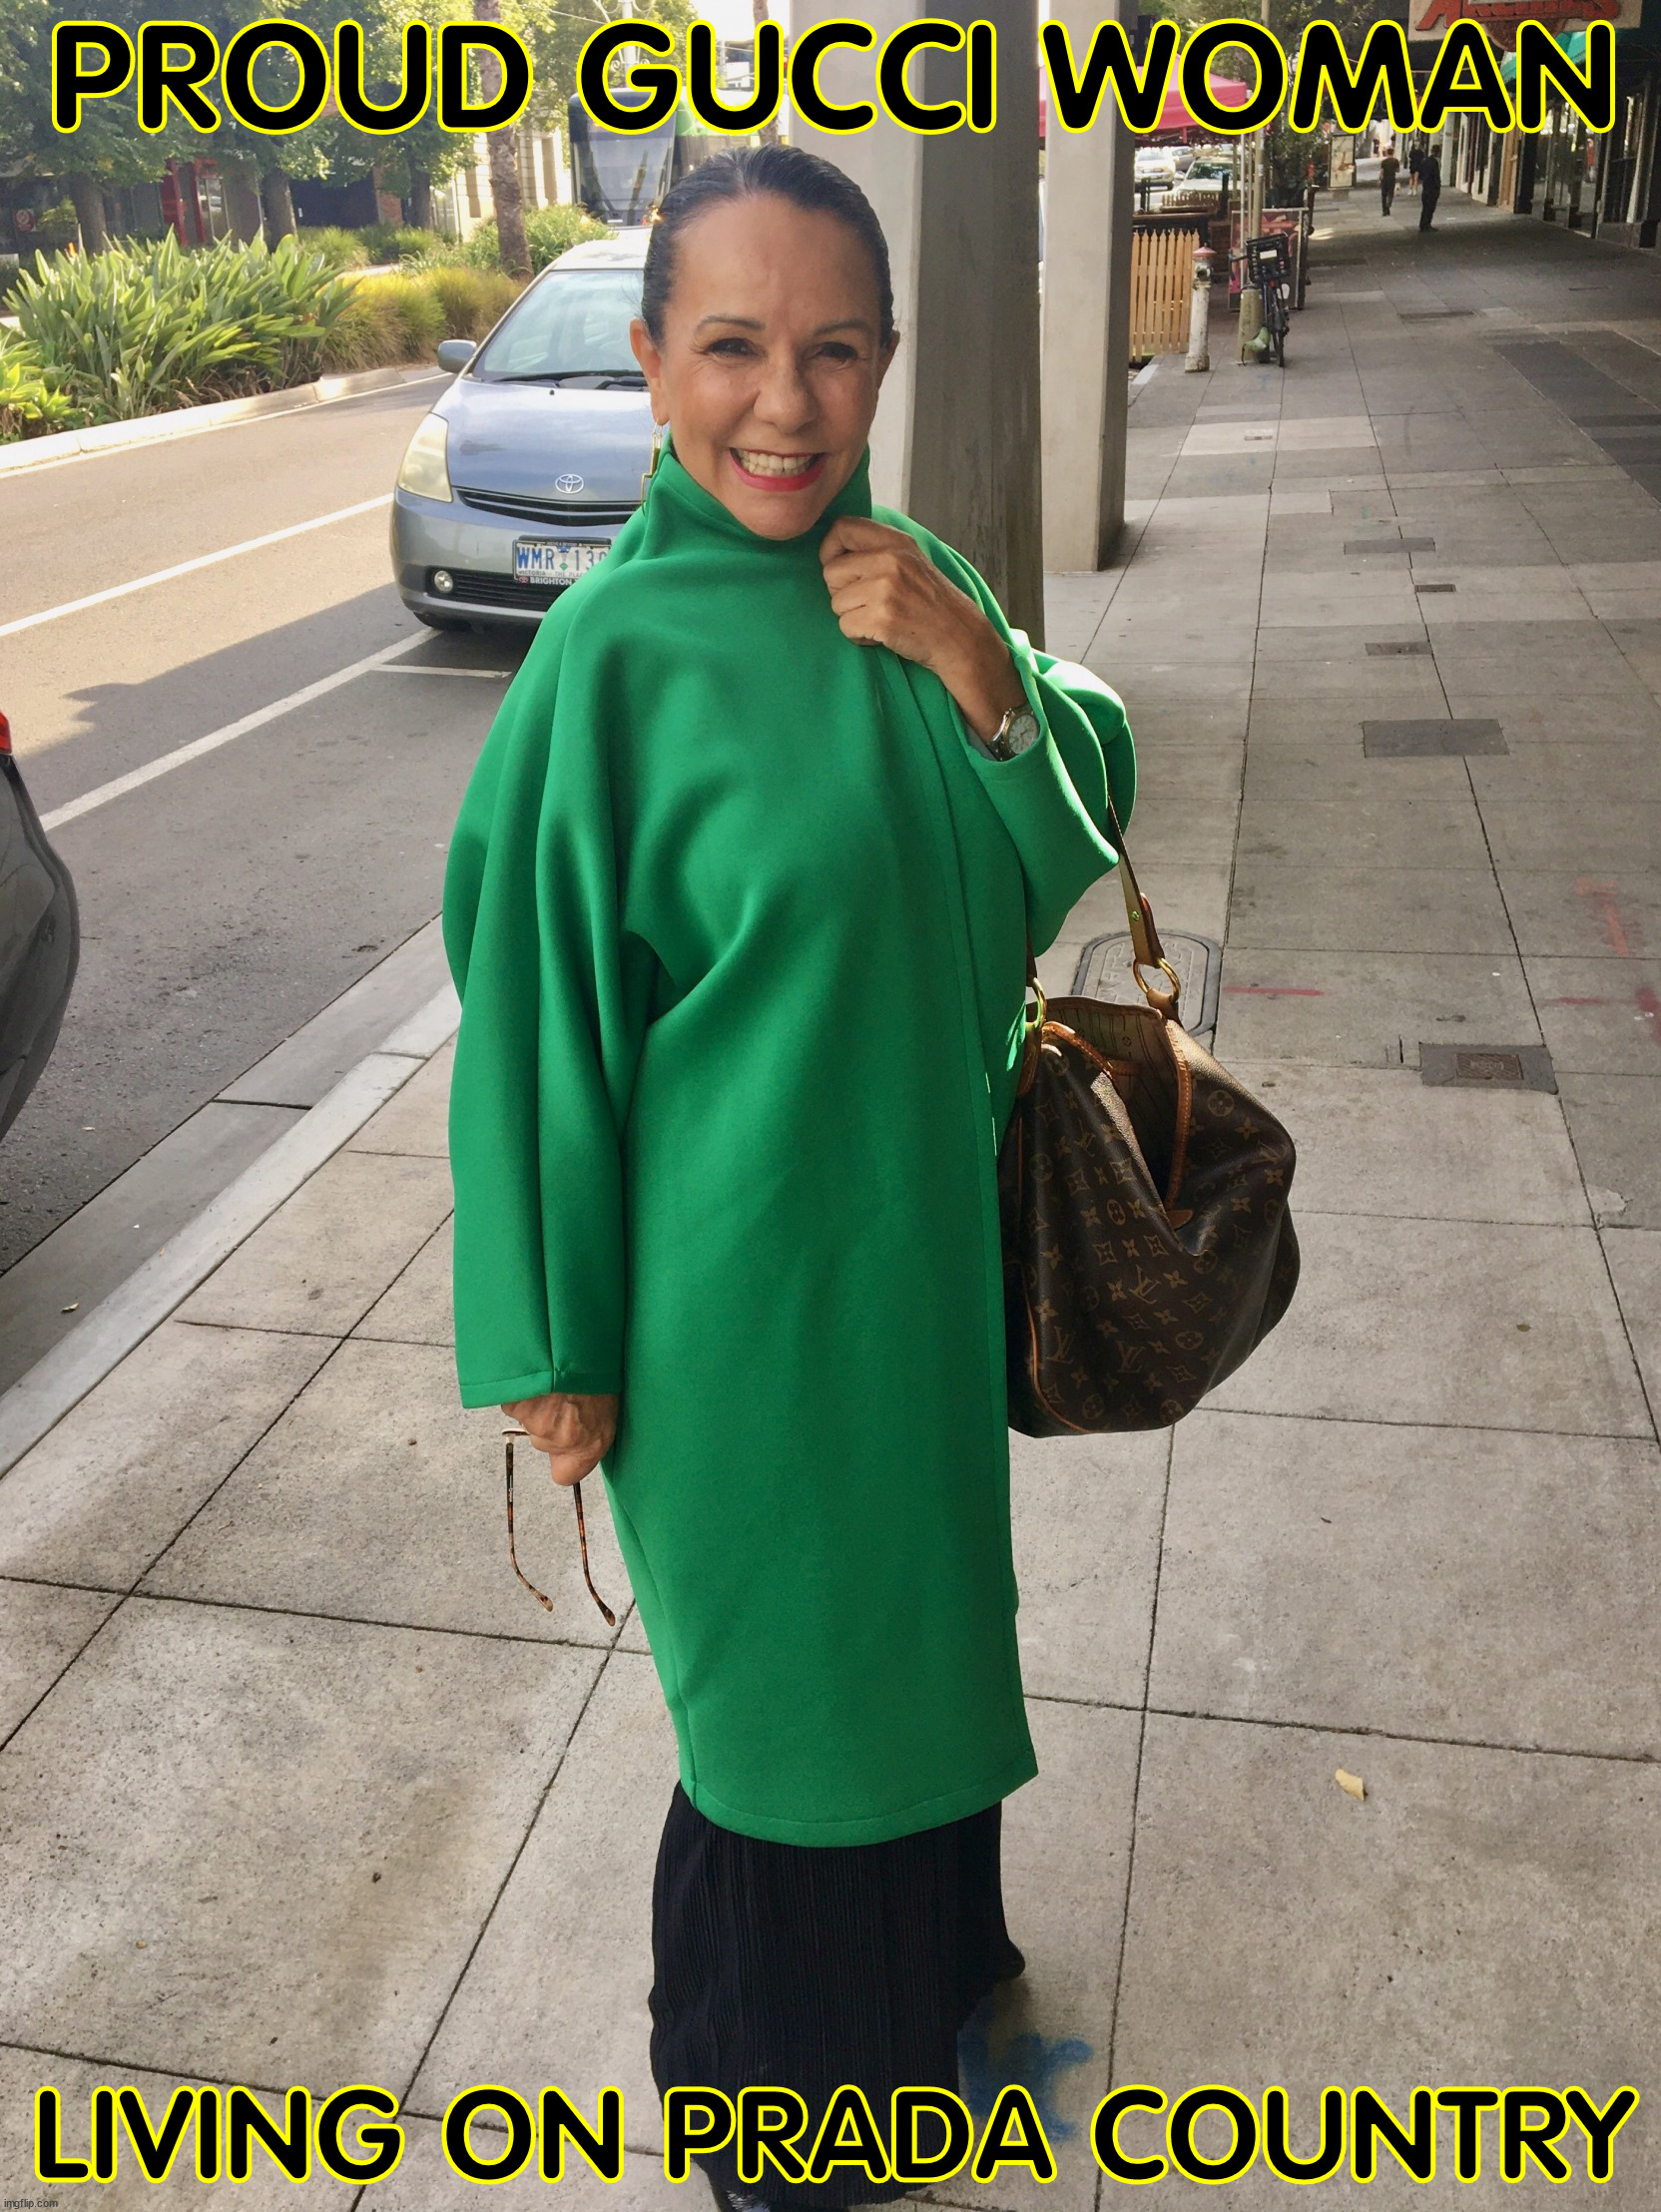 Linda Burney St Patrick's Day Coat | PROUD GUCCI WOMAN; LIVING ON PRADA COUNTRY | image tagged in aborignal,woman,politicians,gucci,louis vuitton,prada | made w/ Imgflip meme maker